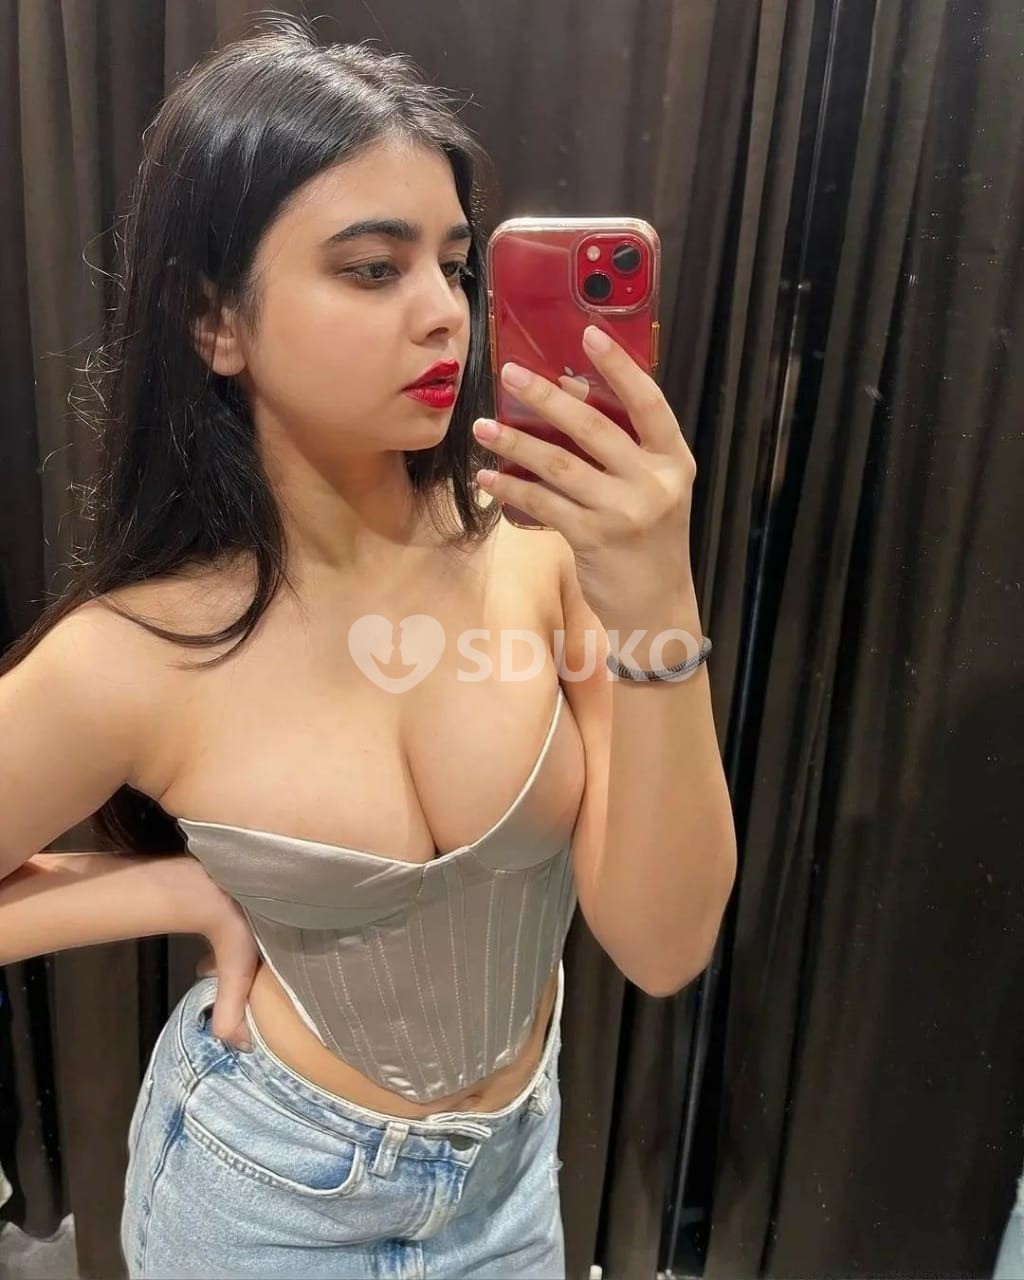 MOGA  VIP TODAY LOW PRICE ;/ESCORT 🥰SERVICE 100% SAFE AND SECURE ANYTIME CALL ME 24 X 7 SERVICE AVAILABLE 100% SAFE